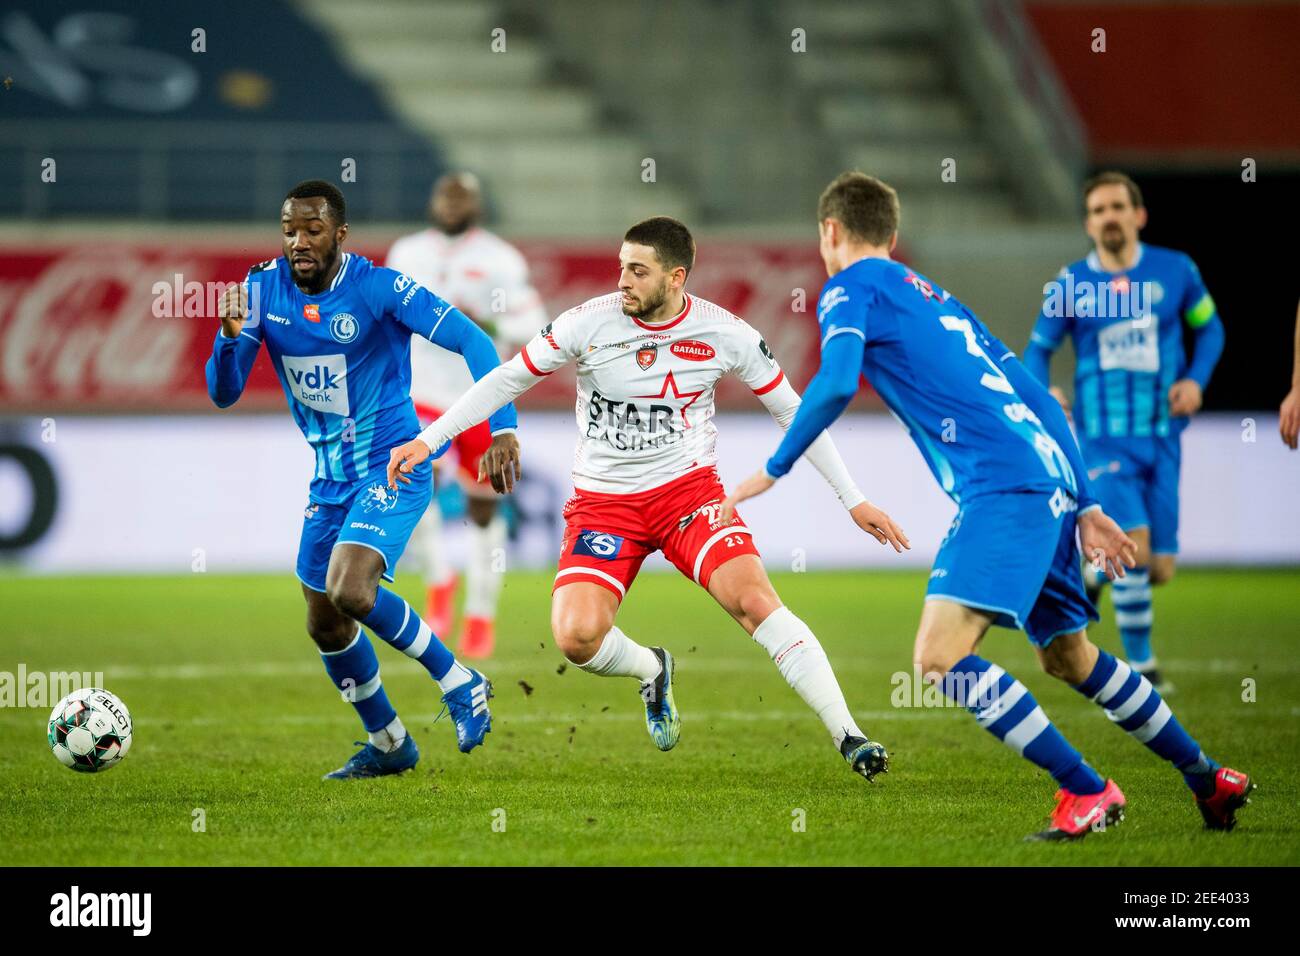 Gent's Elisha Owusu and Mouscron's Bruno Xadas Alexandre Vieira Almeida fight for the ball during a soccer match between KAA Gent and Royal Excel Mous Stock Photo